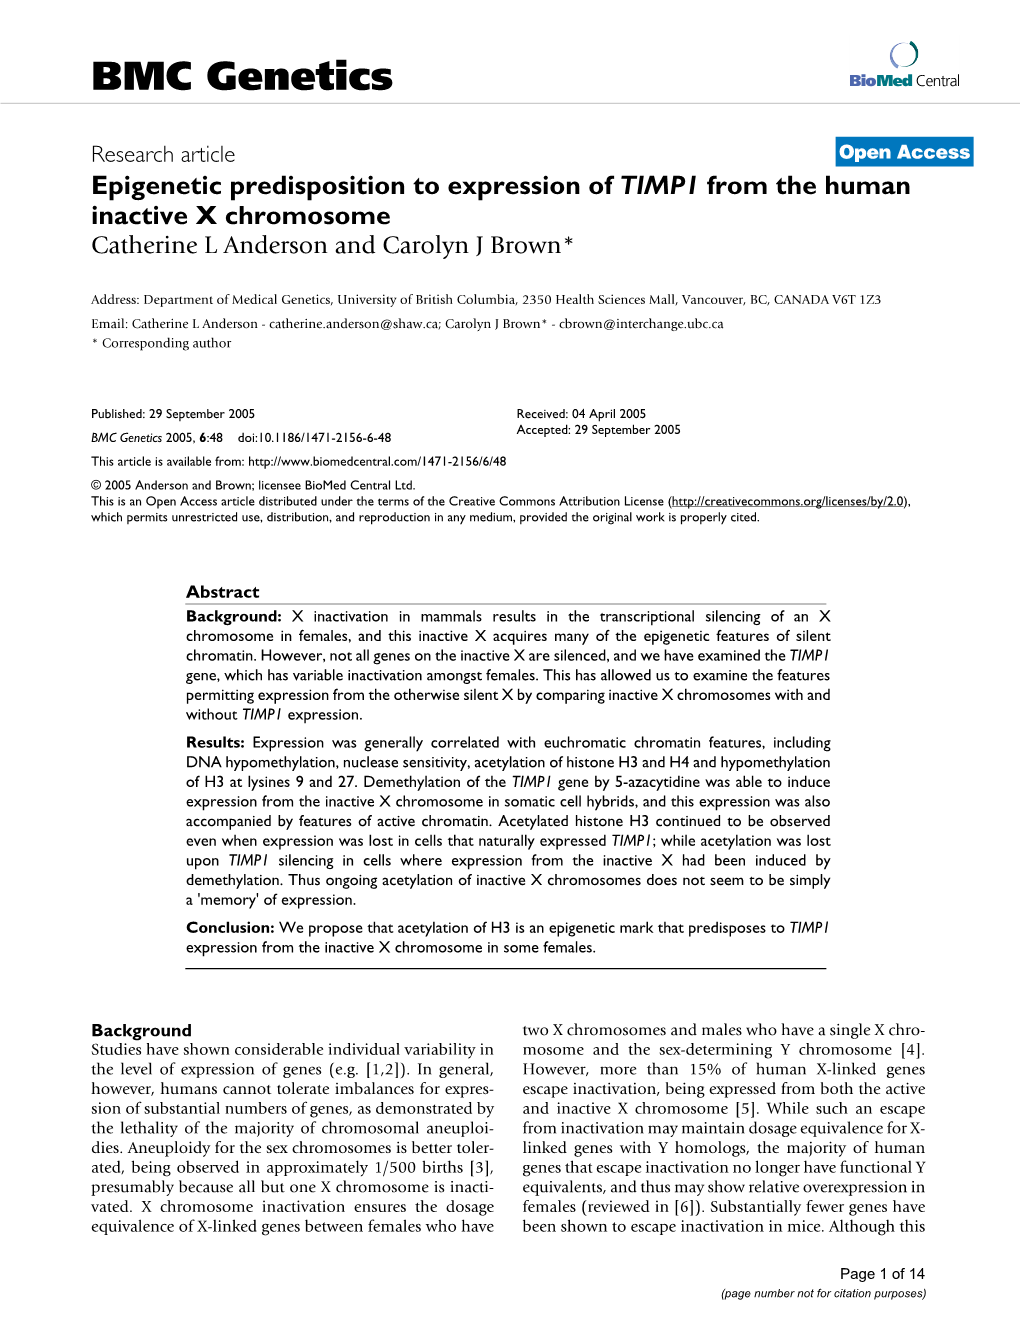 Epigenetic Predisposition to Expression of TIMP1 from the Human Inactive X Chromosome Catherine L Anderson and Carolyn J Brown*